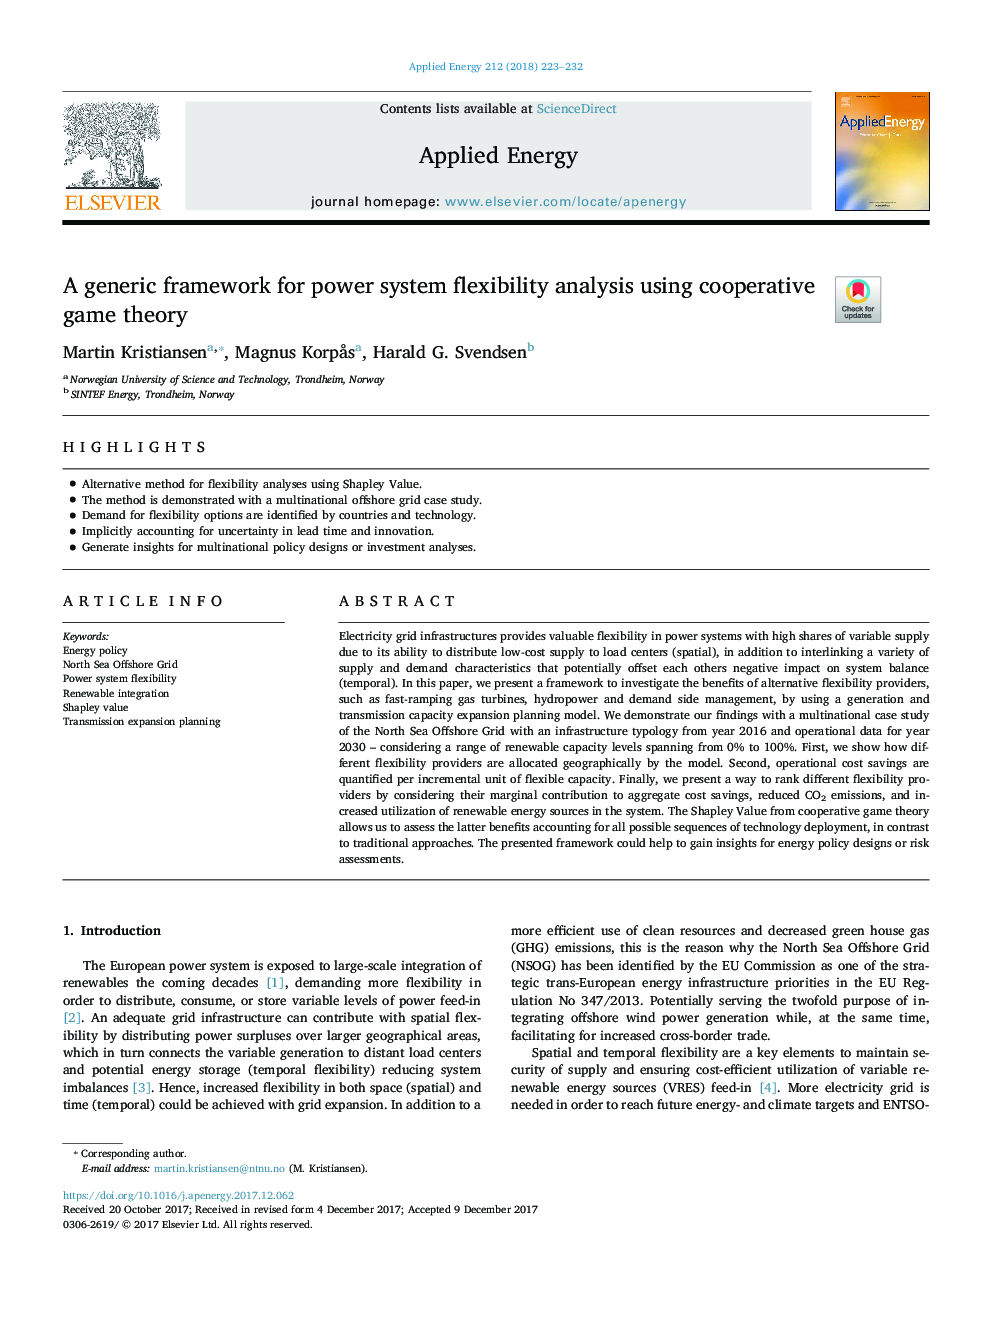 A generic framework for power system flexibility analysis using cooperative game theory